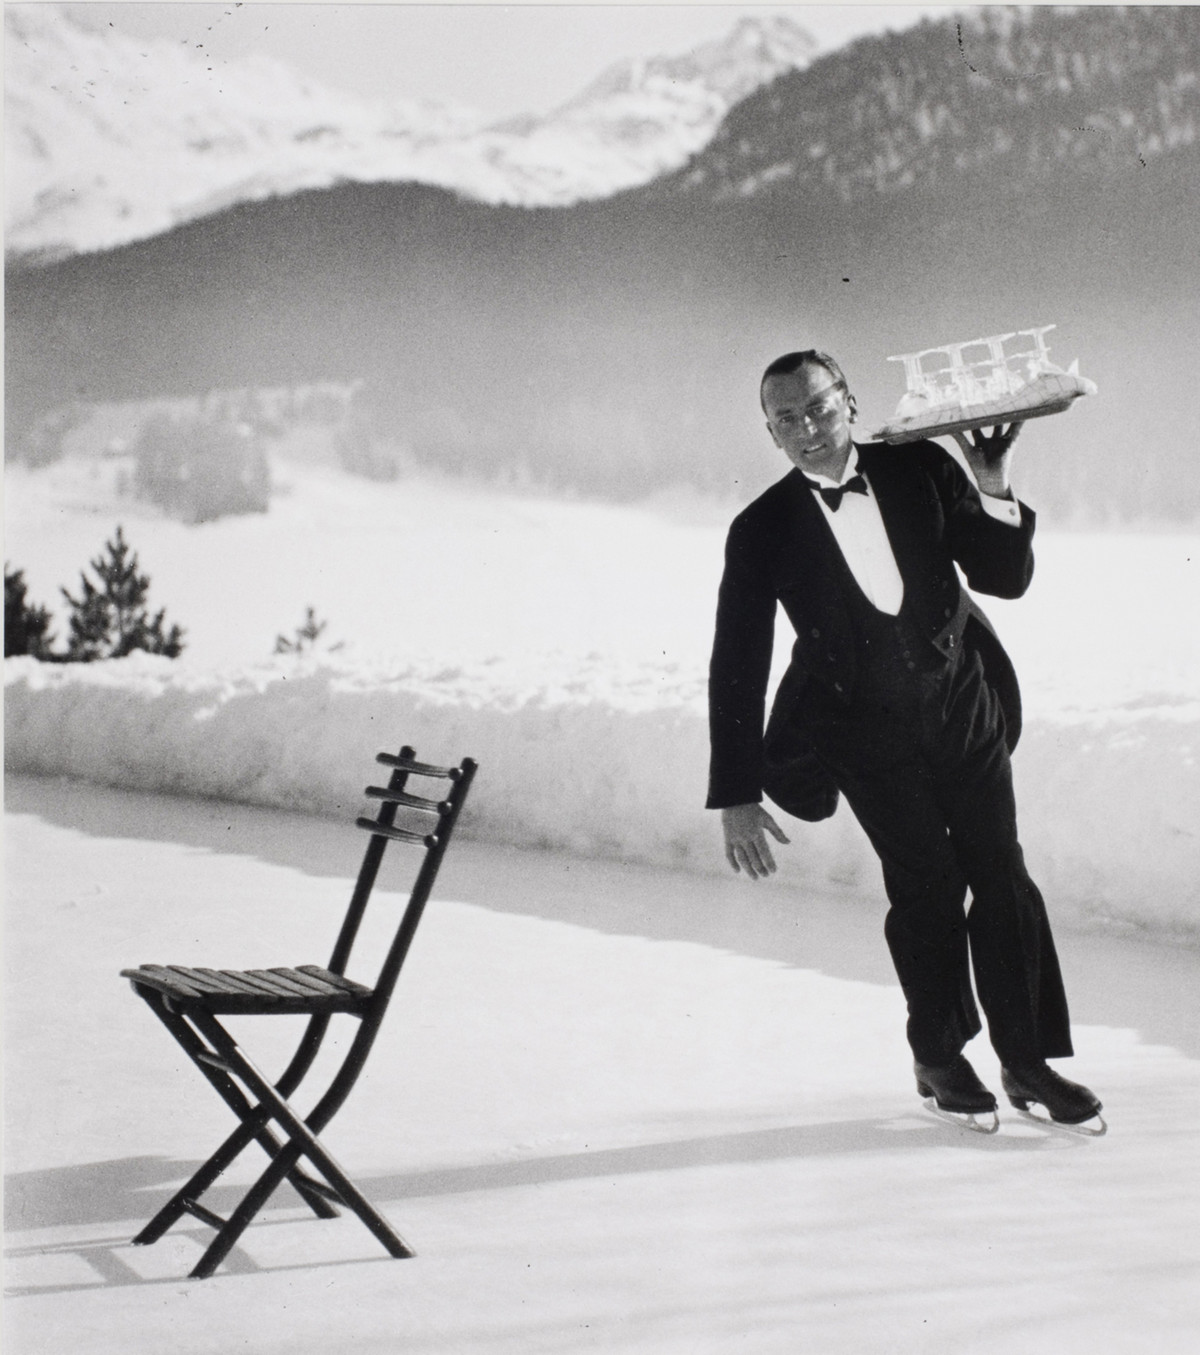 Senior waiter René Breguet from the Grand Hotel serving ice skating cocktails. The commune of St. Moritz in Switzerland, 1932.